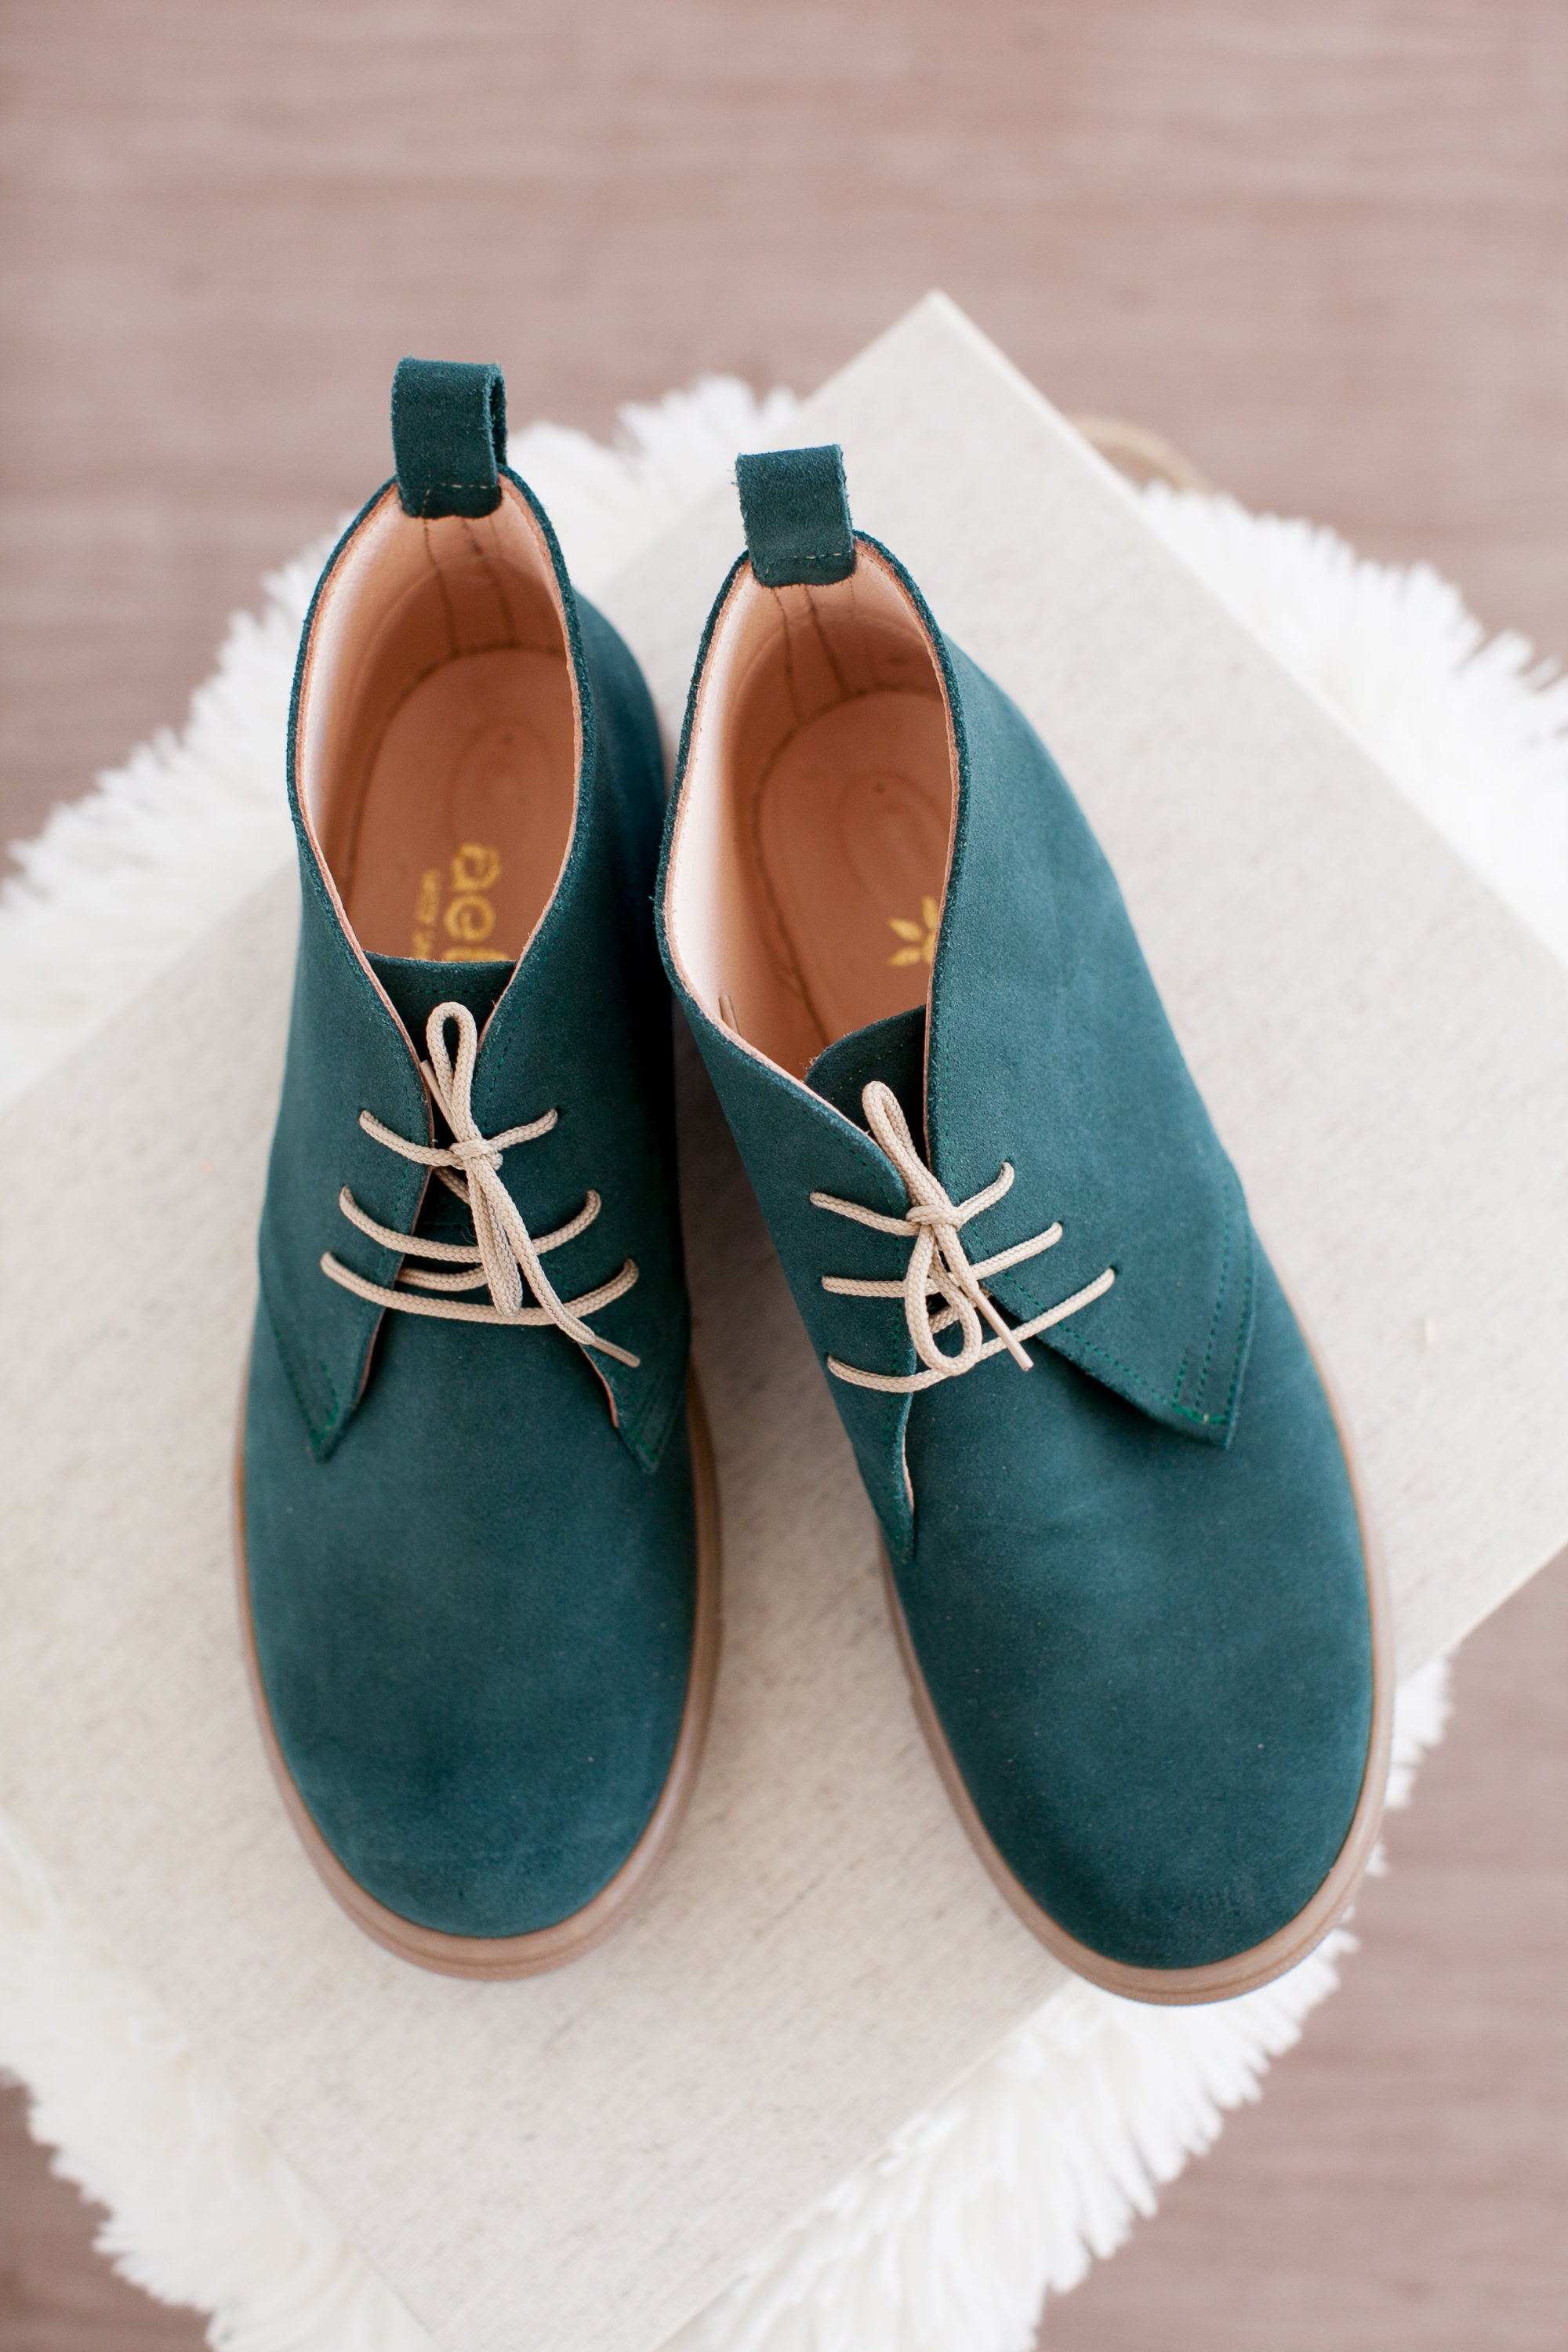 Dark Green Leather Shoes Handmade Aelia Sneakers Green Ankle Boots for ...